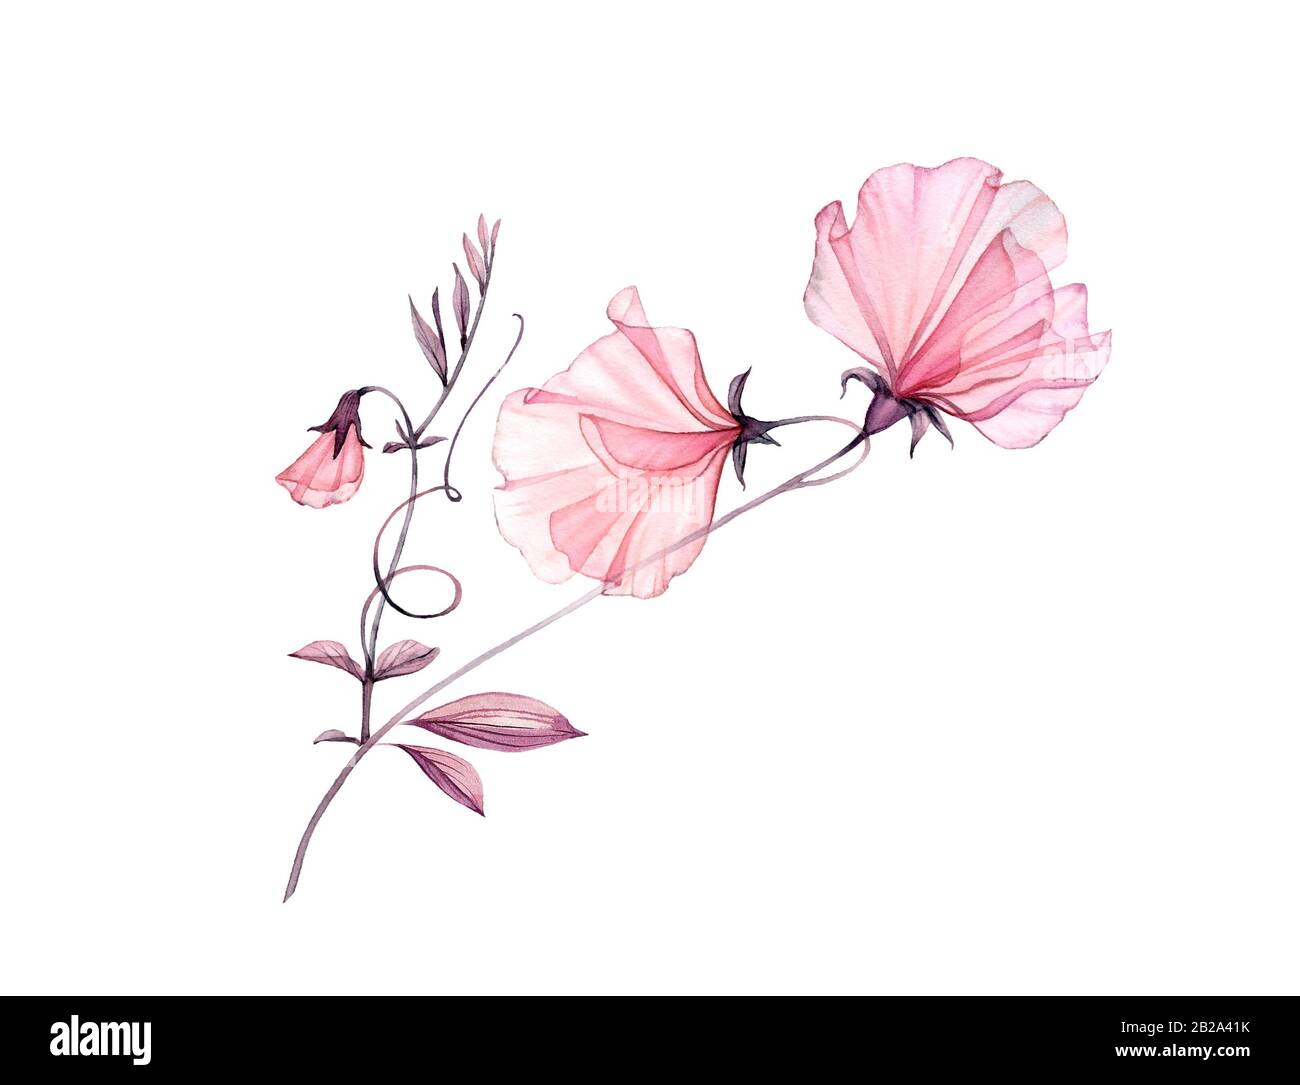 Transparent sweet pea. Watercolor floral composition with branch and blowers. Isolated artwork on white. Botanical hand painted illustration for Stock Photo